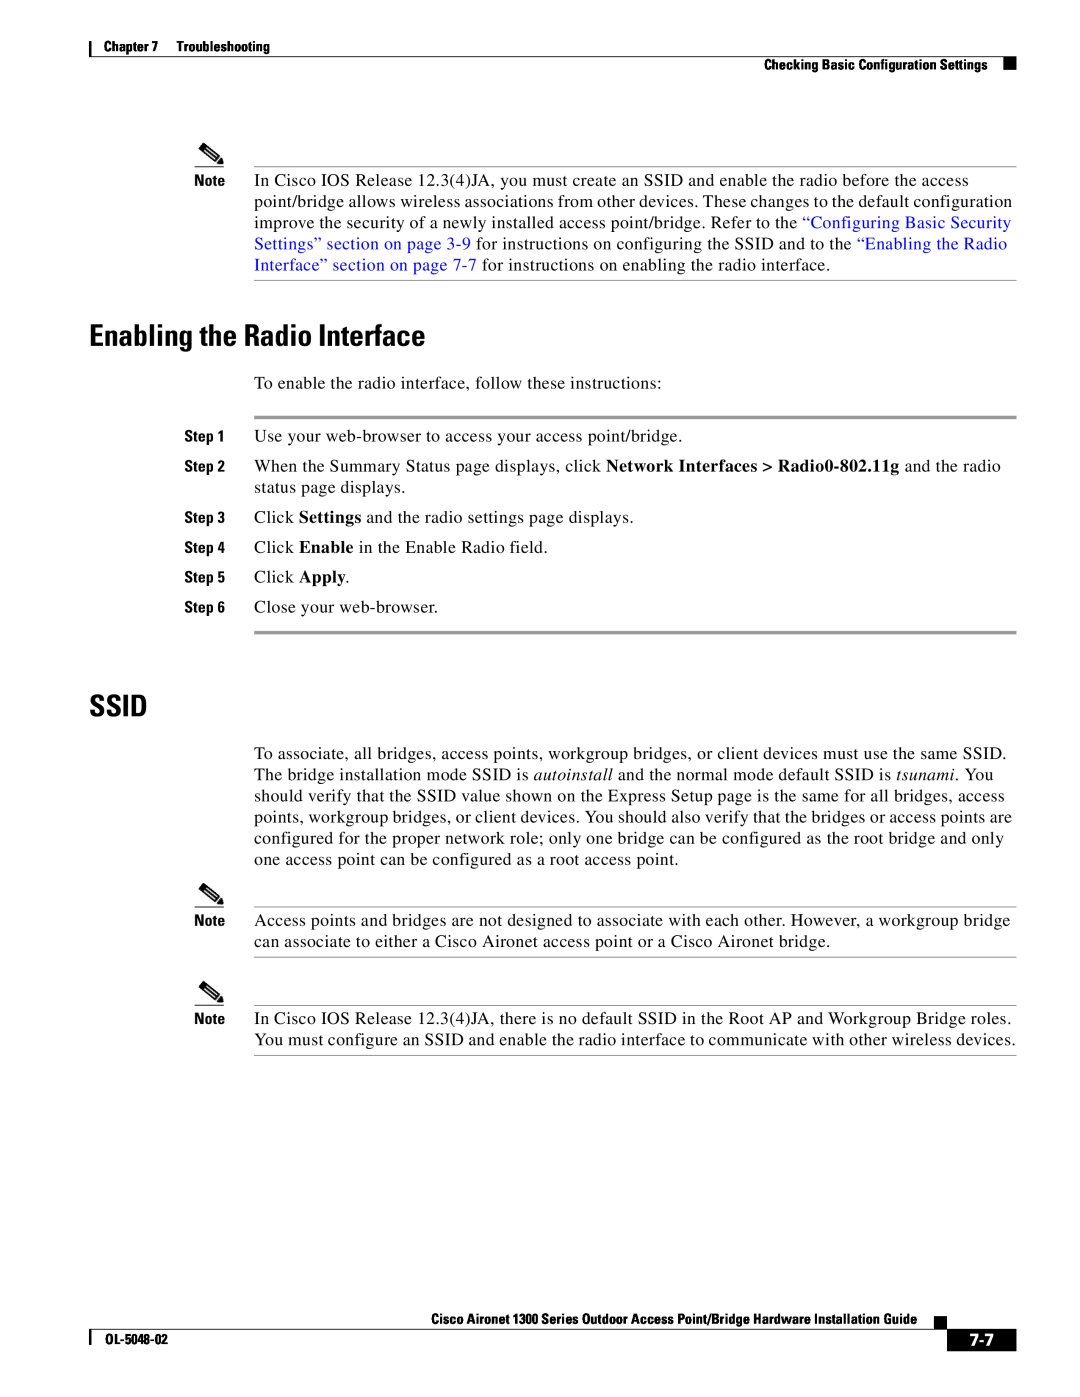 Cisco Systems 1300 Series manual Enabling the Radio Interface, Ssid 